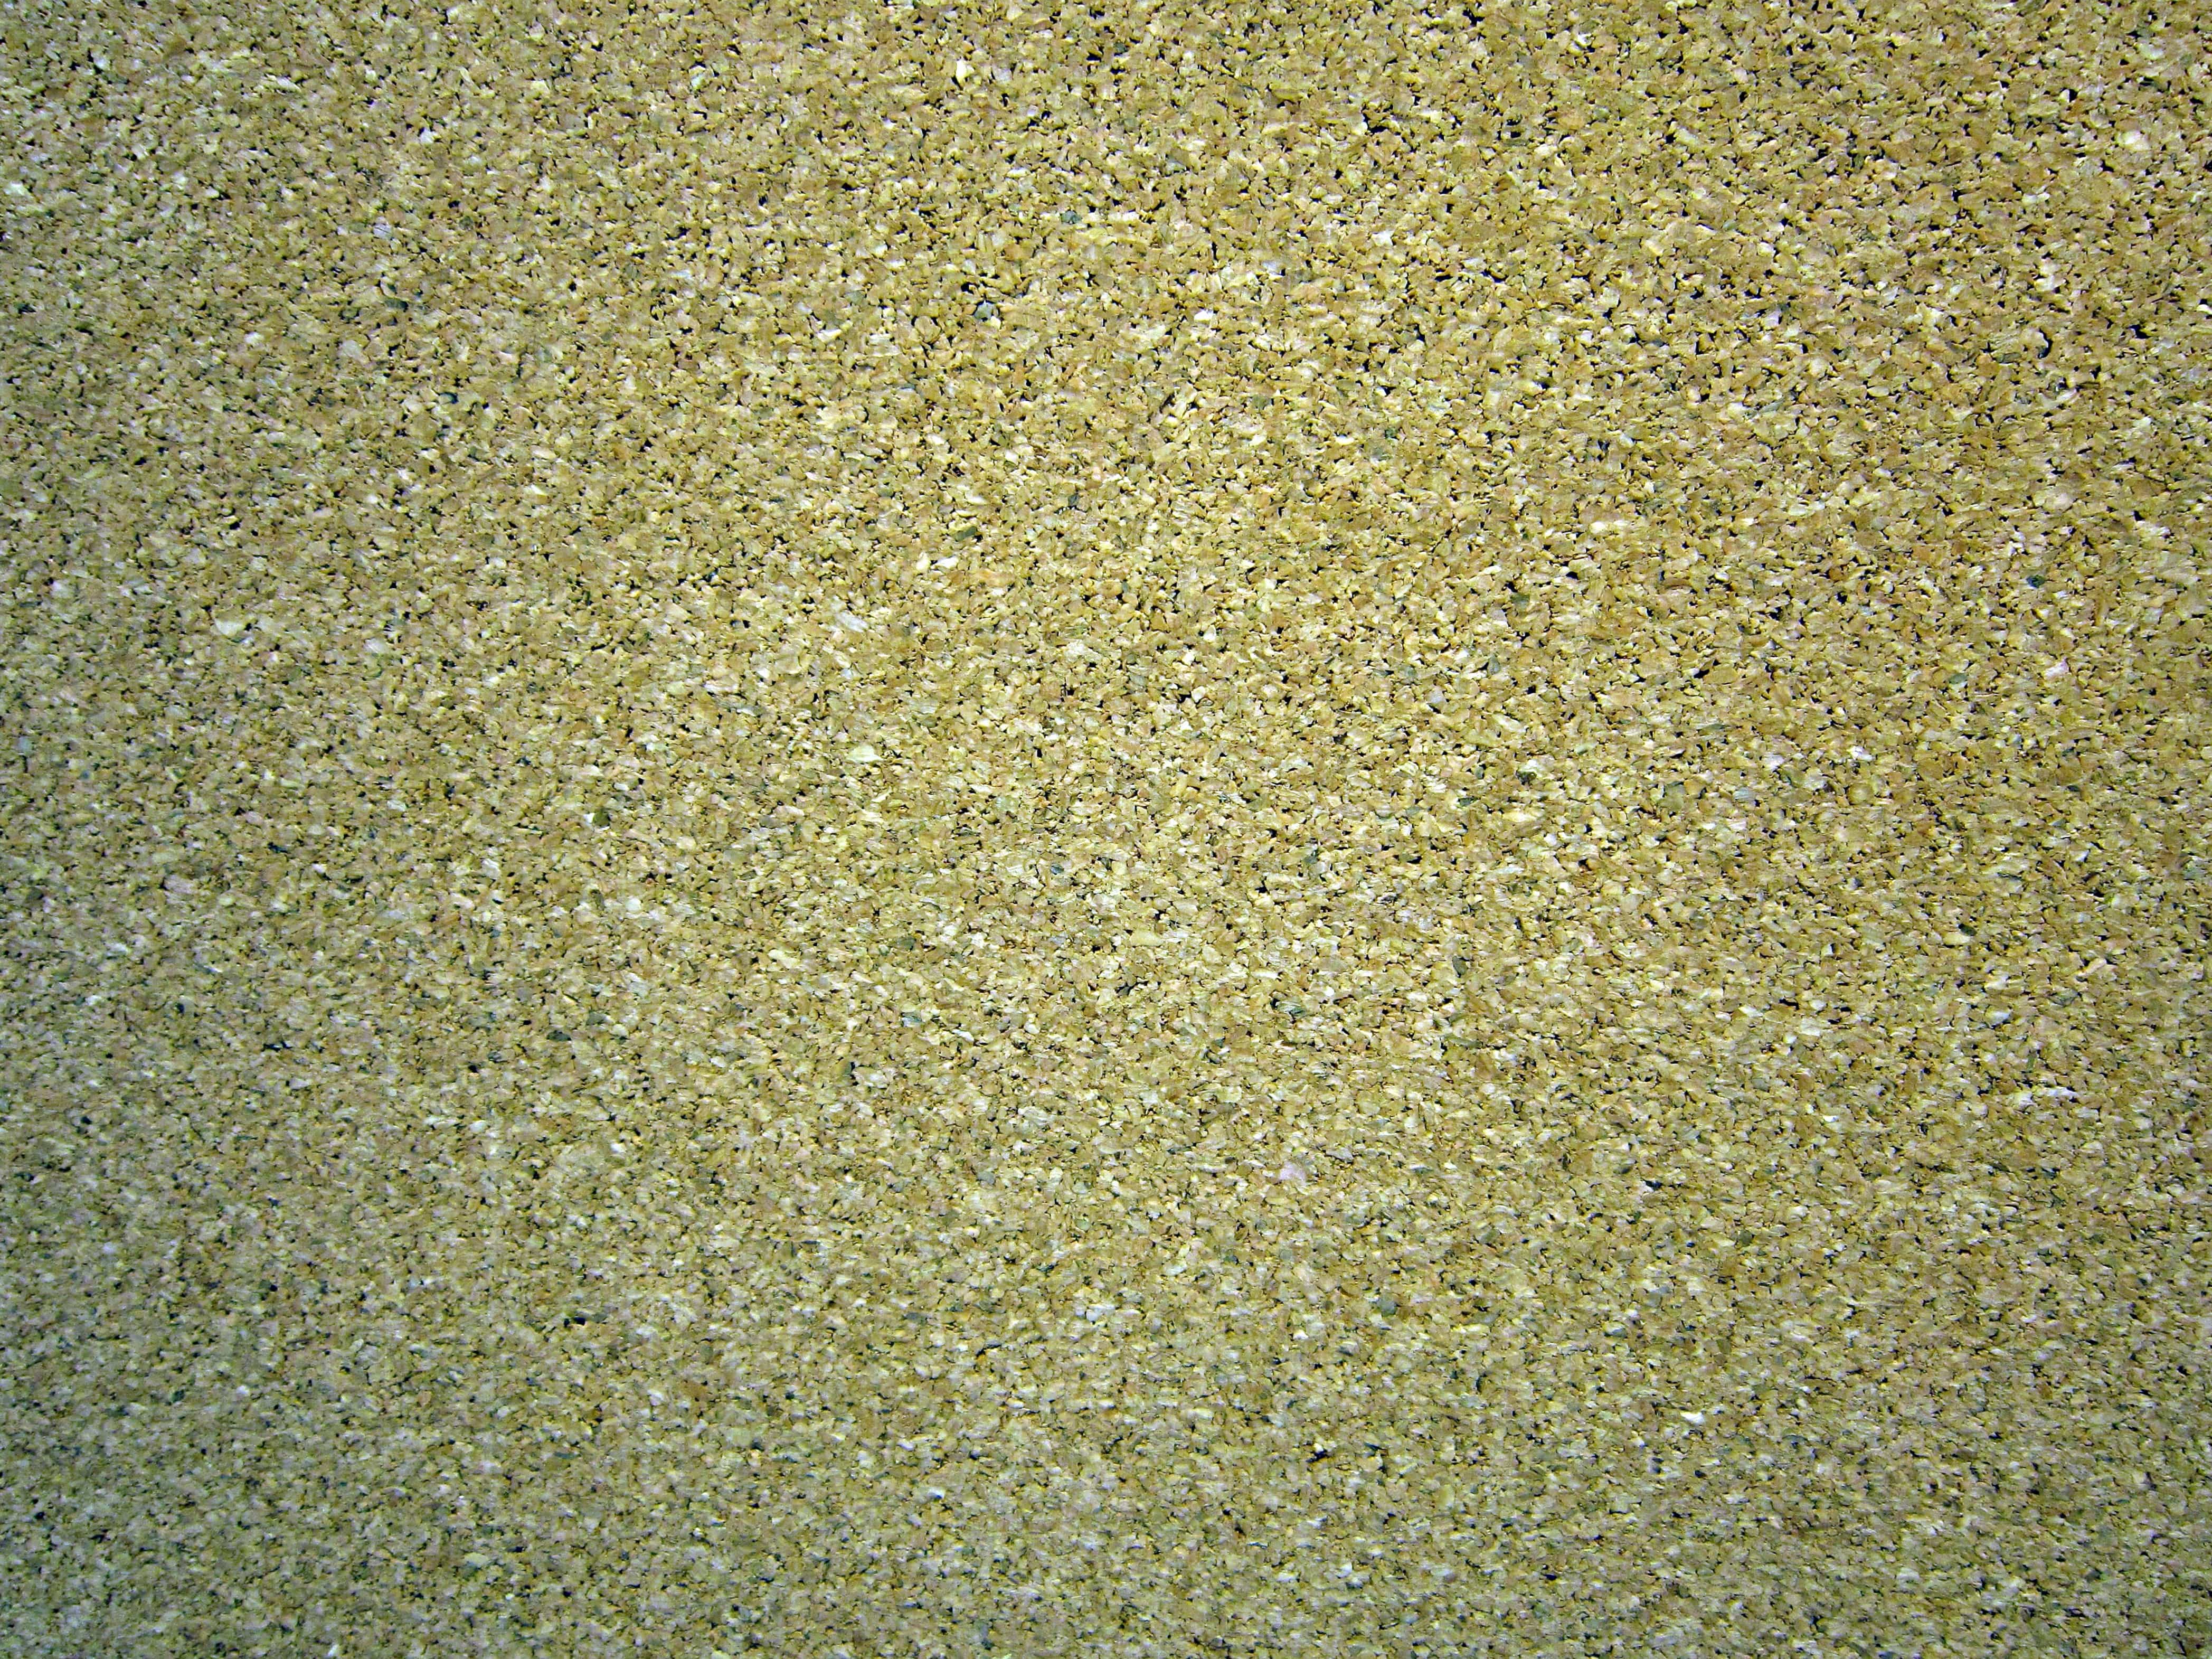 Abstract sand surface photo